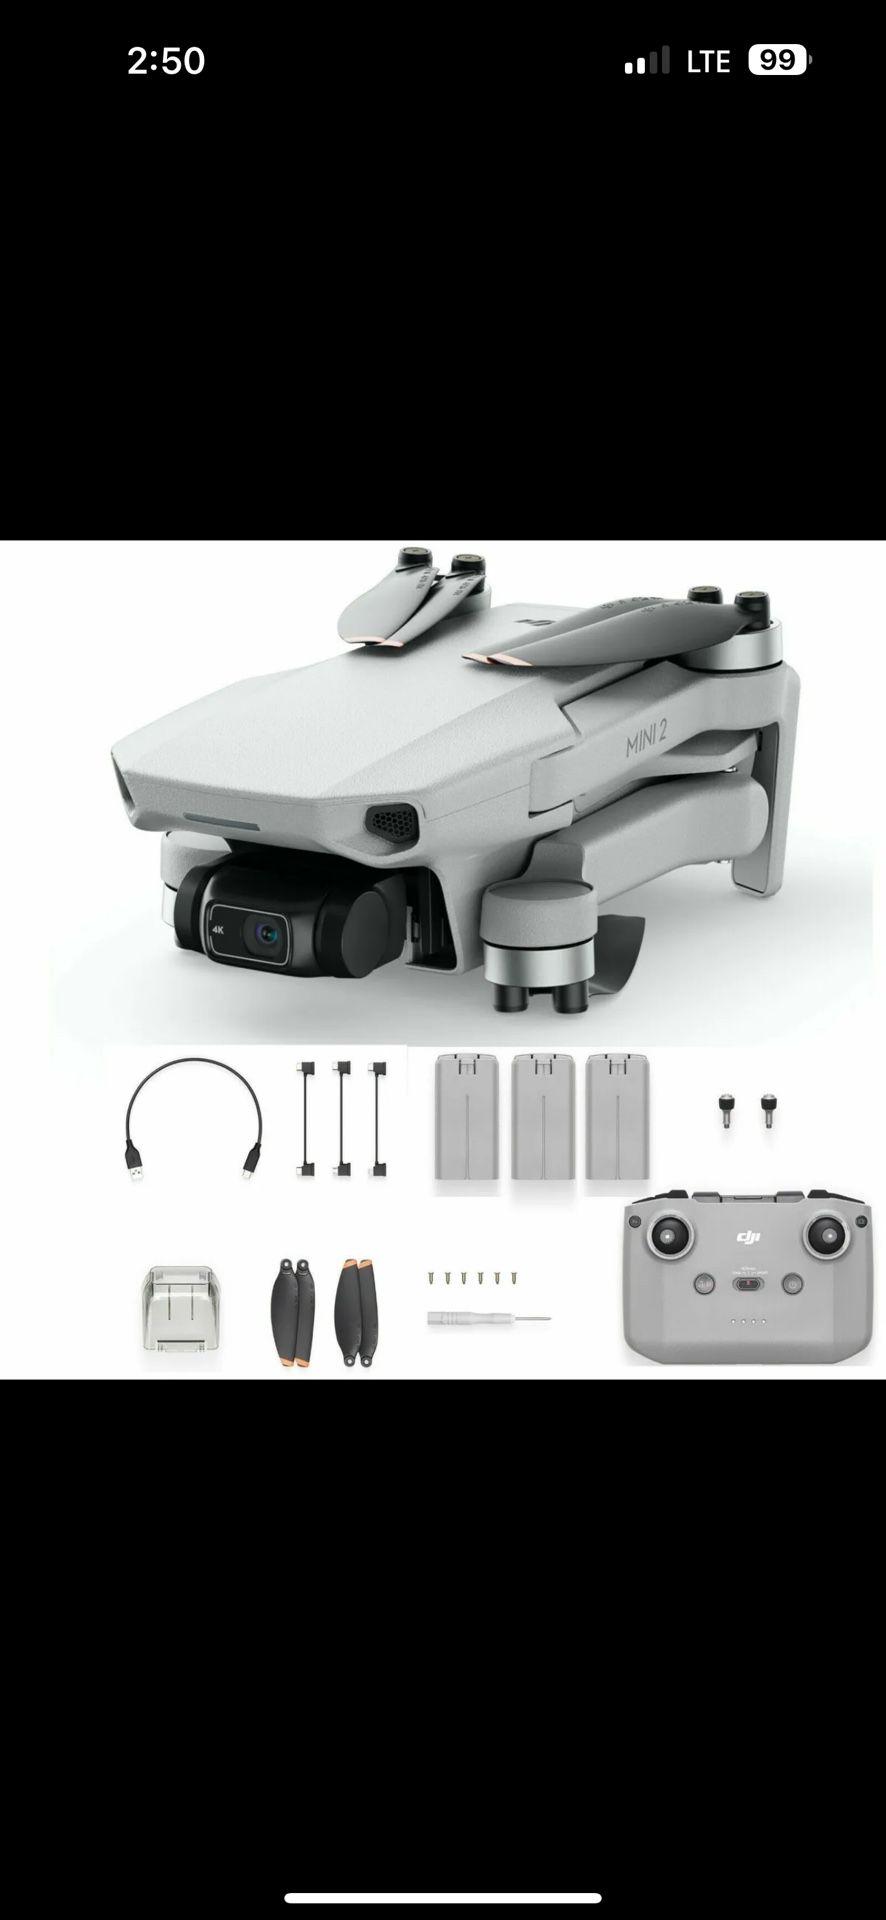 DJI Mini 2 Fly More Combo With Waterproof Case